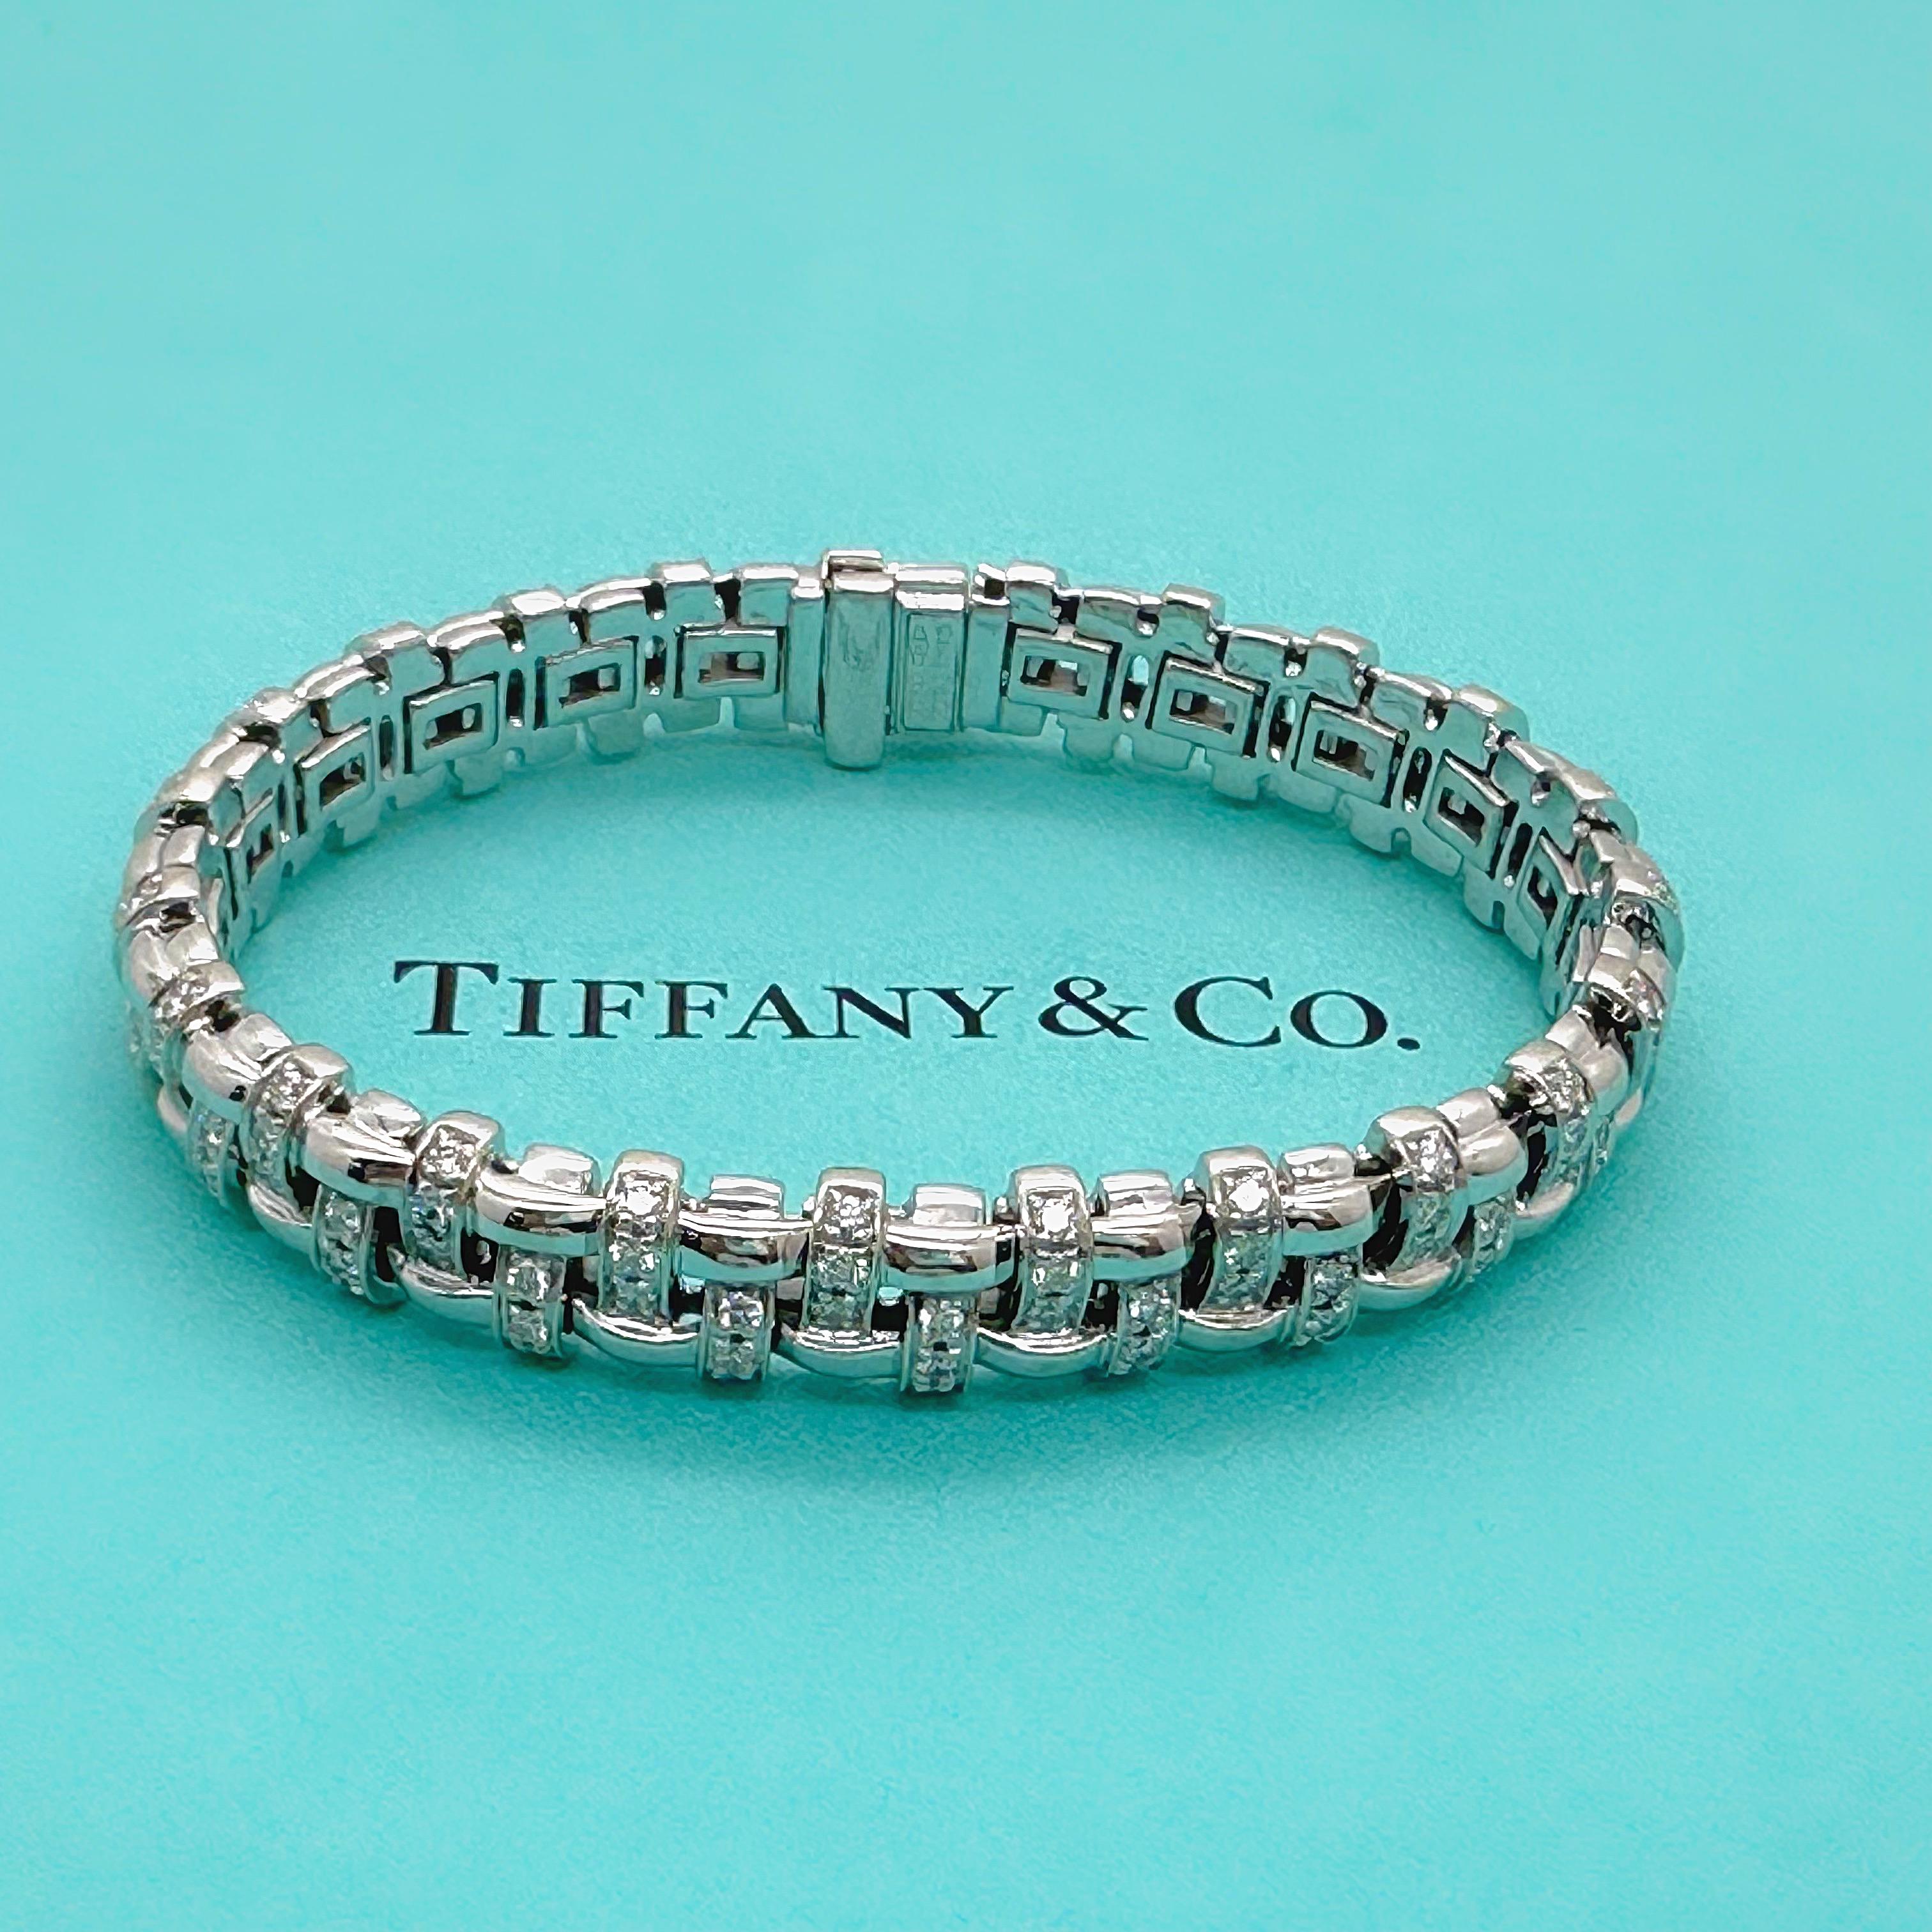 Tiffany & Co. Vannerie Basket Weave Diamond Bracelet in 18kt White Gold In Excellent Condition For Sale In San Diego, CA